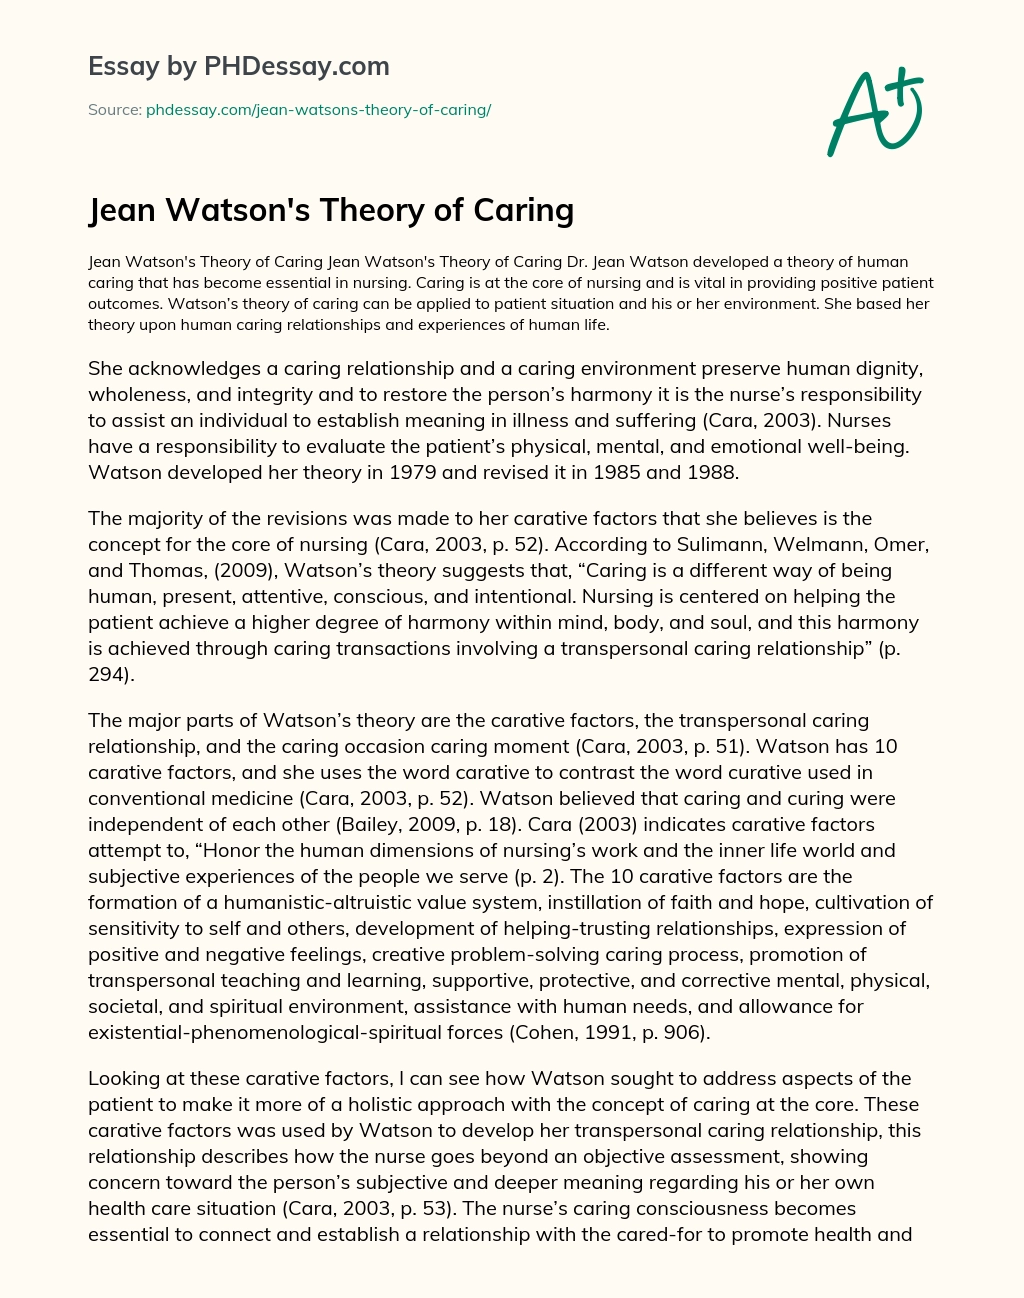 Jean Watson’s Theory of Caring essay